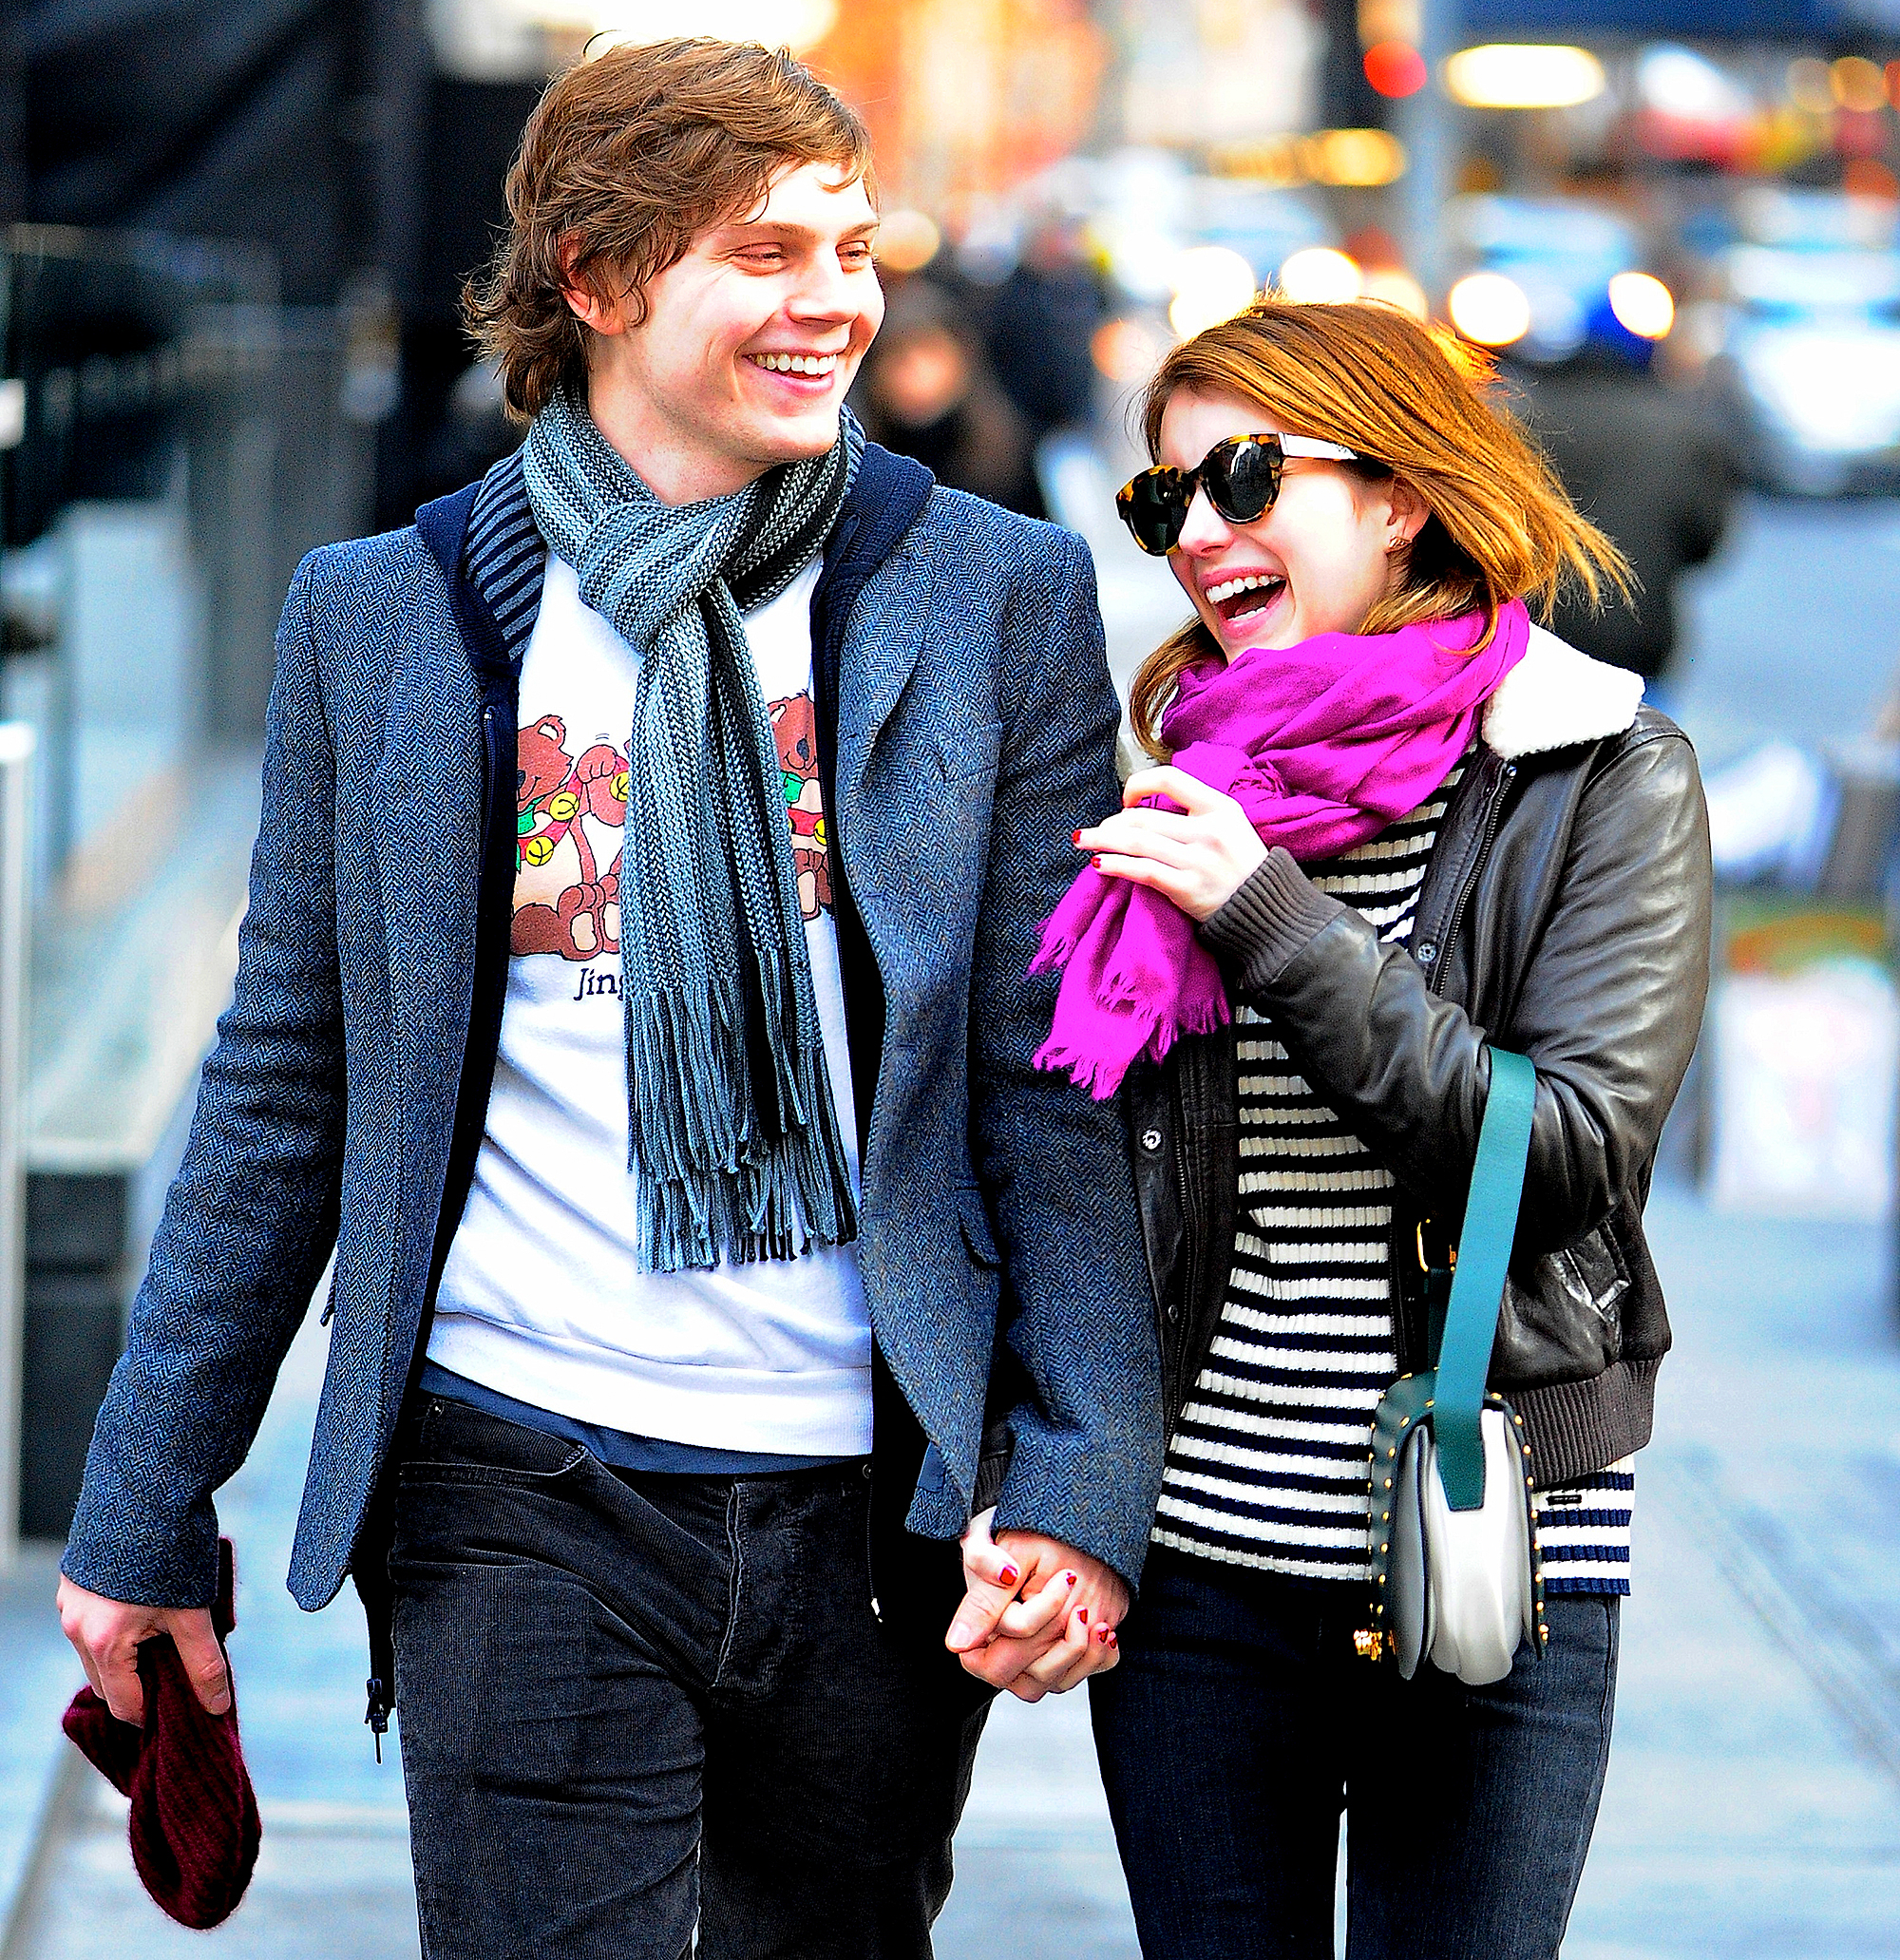 Peters began dating actress Emma Roberts in 2012 after they worked together on.